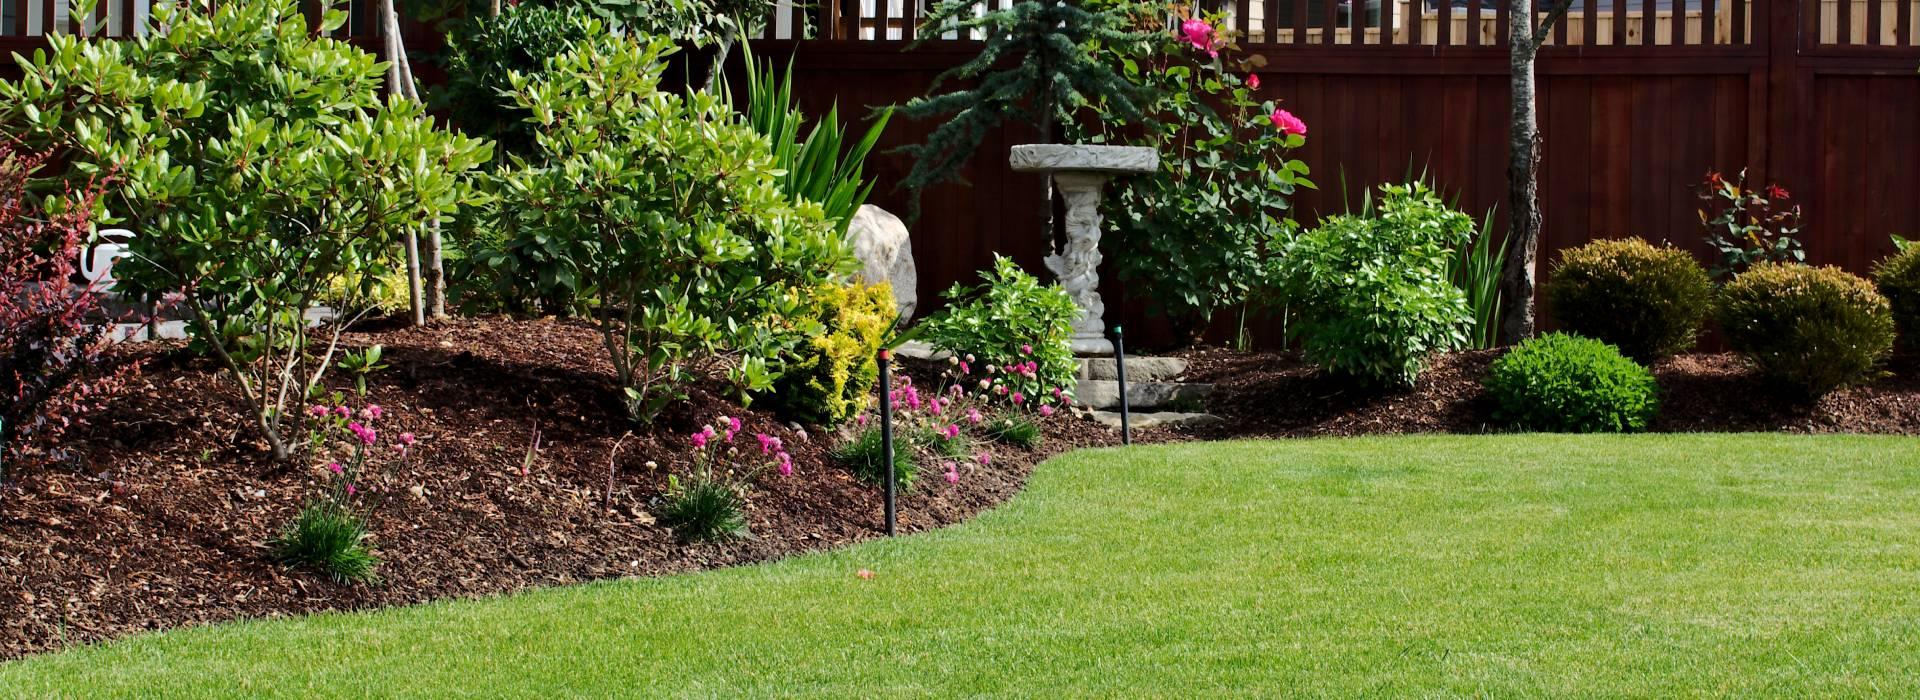 Transform Your Garden With Landscaping Services Sydney Company!